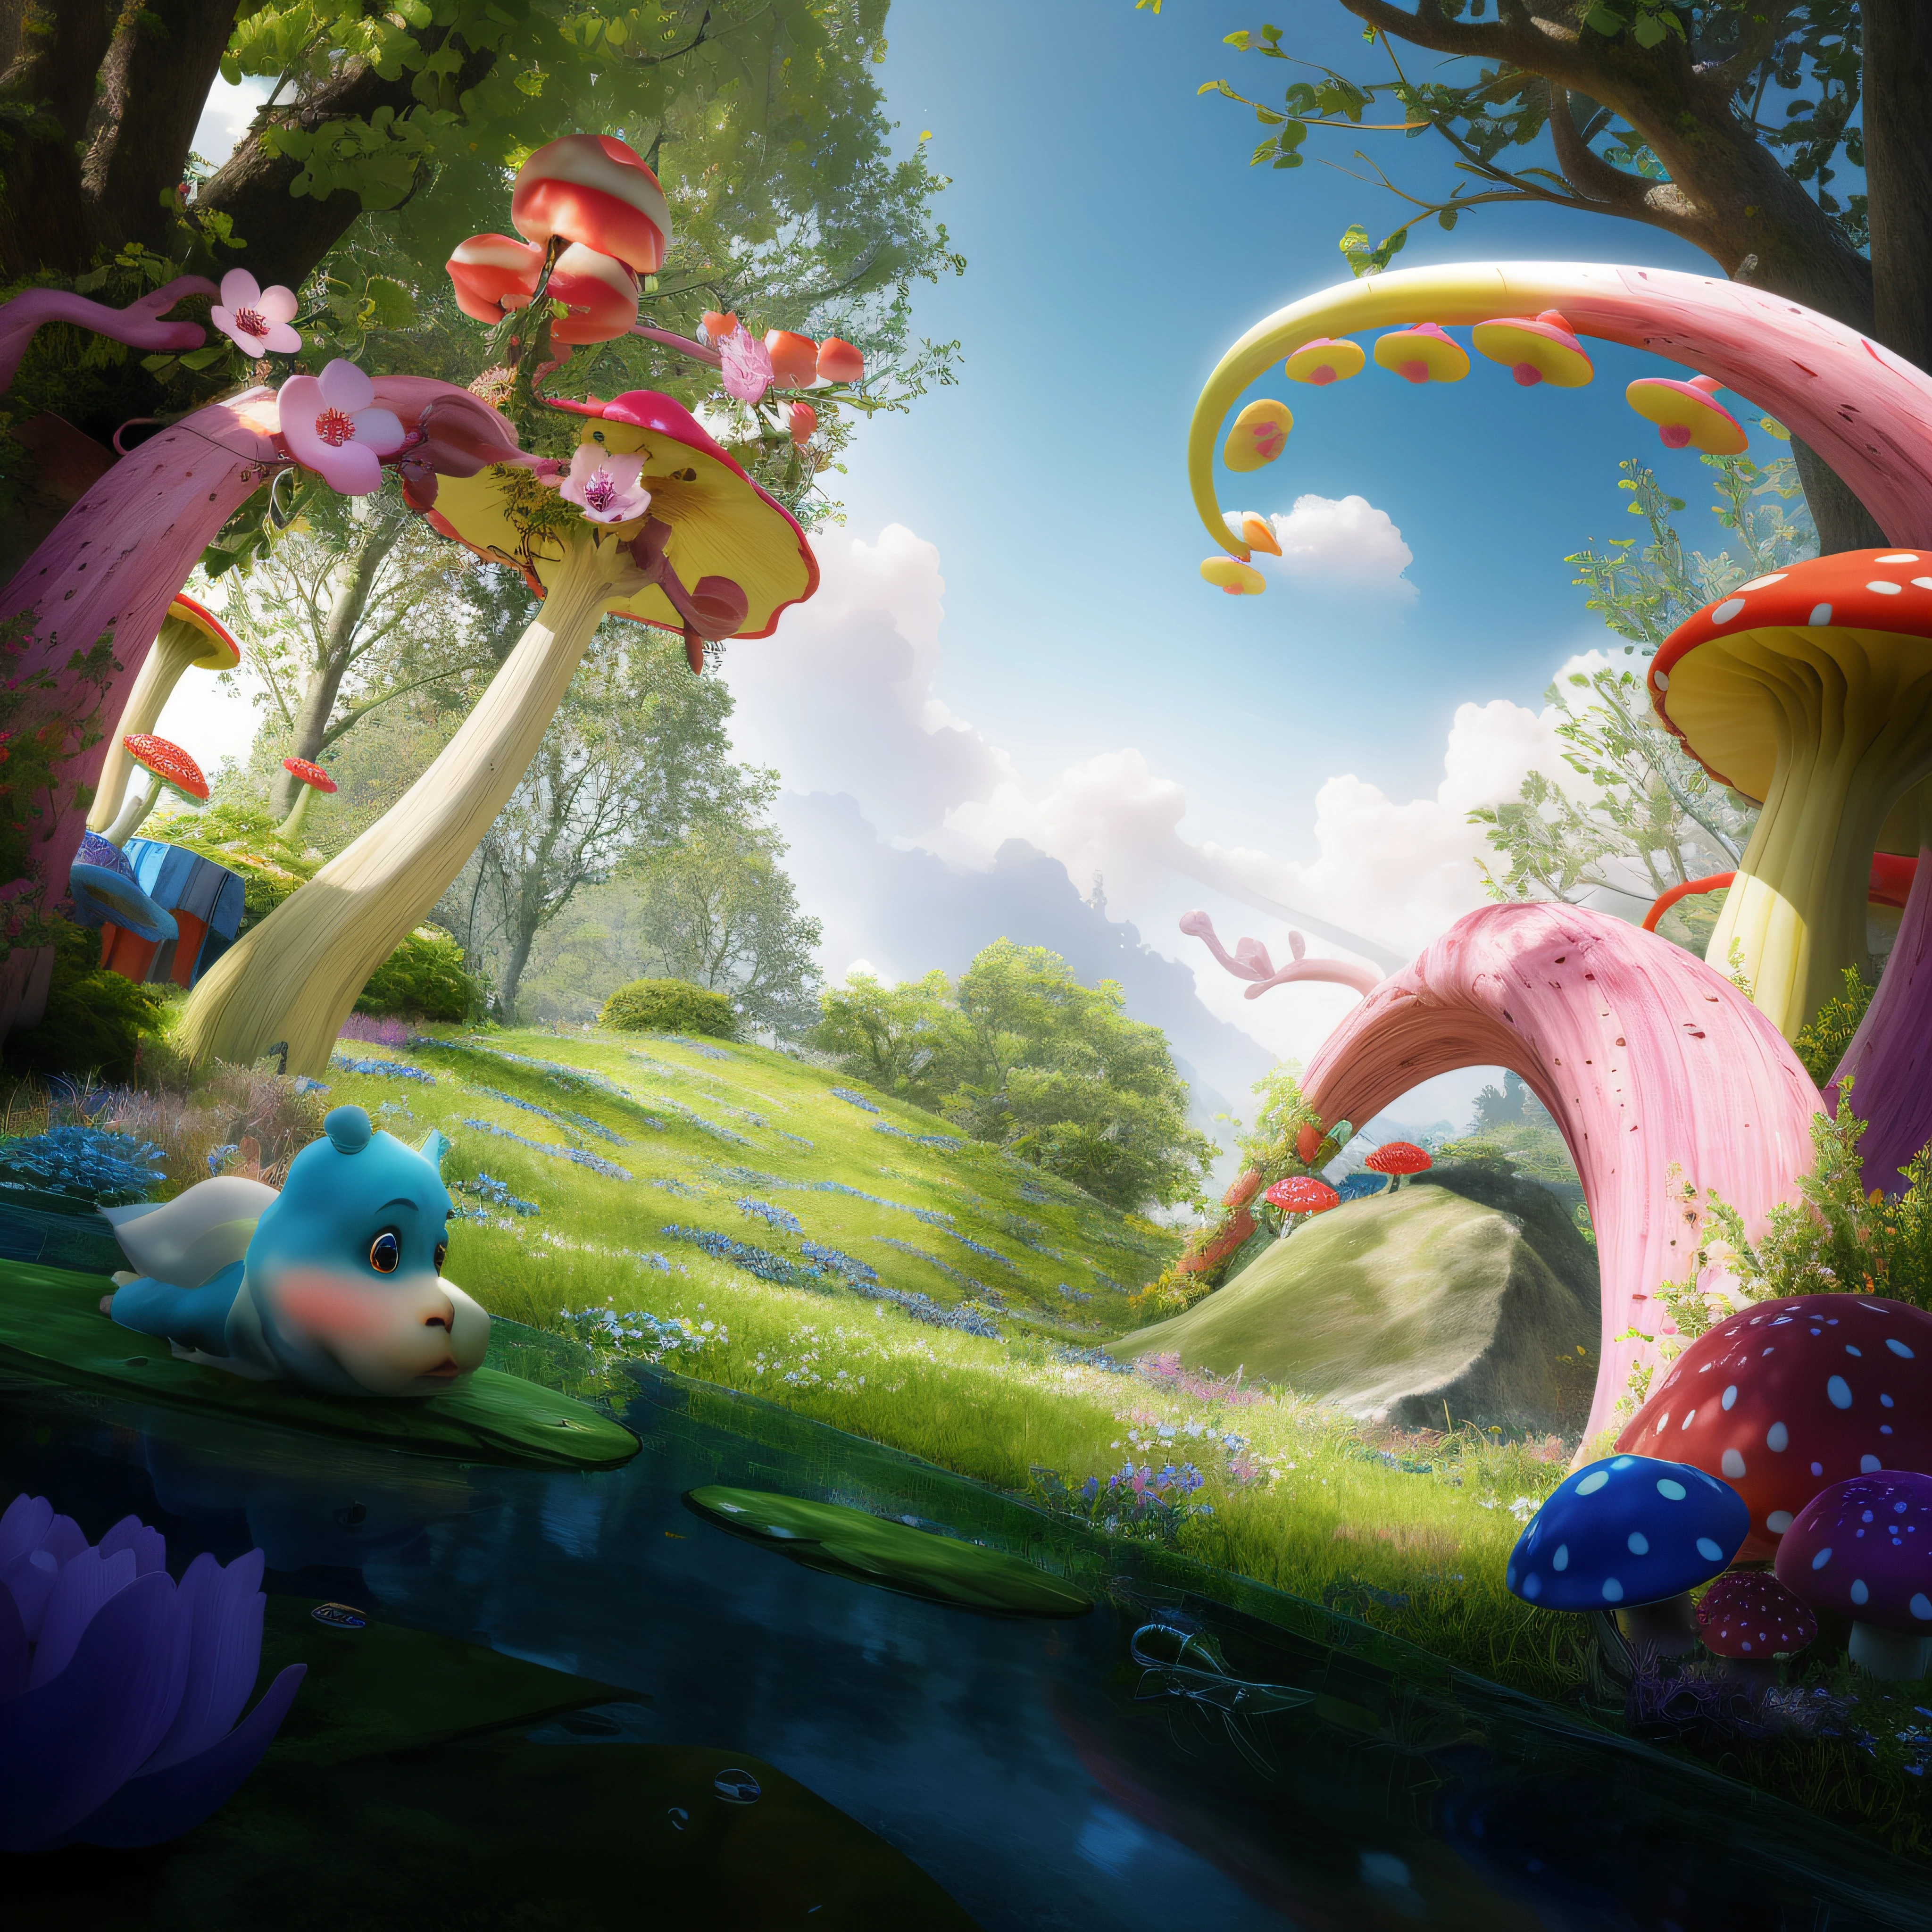 There is a picture of a colorful mushroom garden，There are flowers inside, whimsical fantasy landscape art, beautiful render of a fairytale, fantasy matte painting， Rolands Zilvinskis 3D rendering art, Beautiful digital artwork, Realistic fantasy rendering, fantasy magical vegetation, beautiful 3d concept art, 4k highly detailed digital art, colorfull digital fantasy art, From Alice in Wonderland